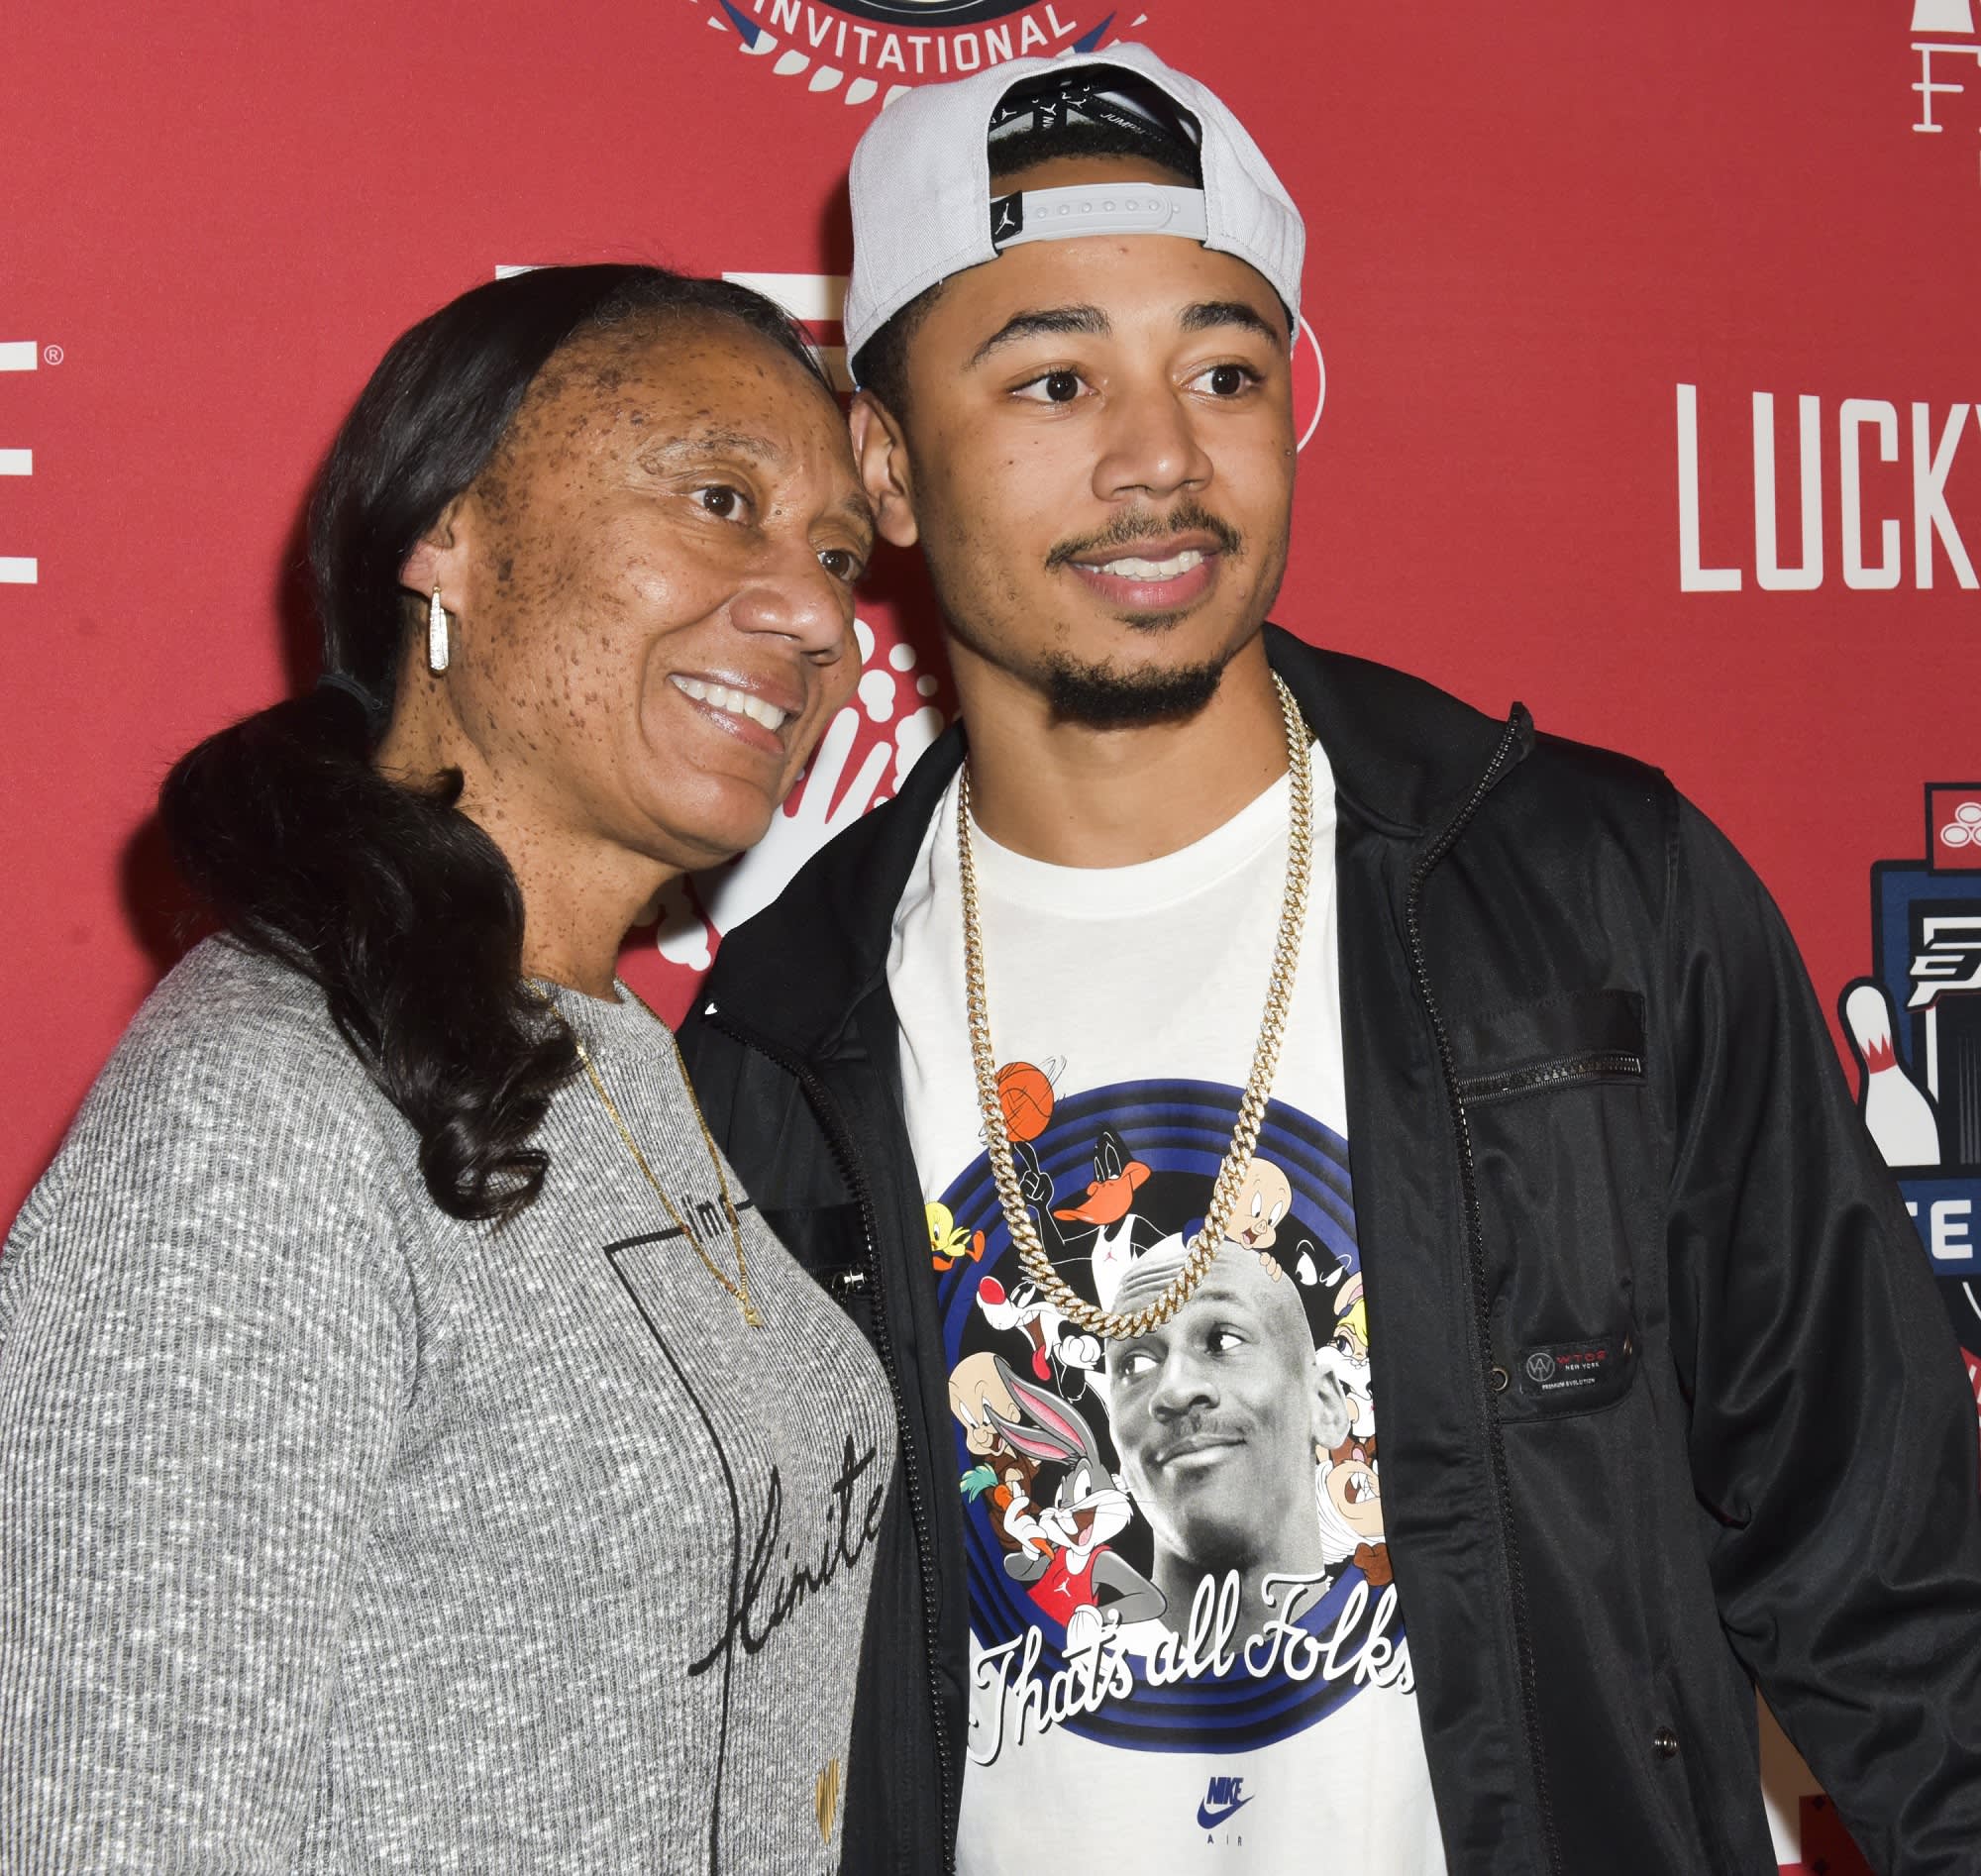 How the Dodgers' Mookie Betts' mom became his first baseball coach